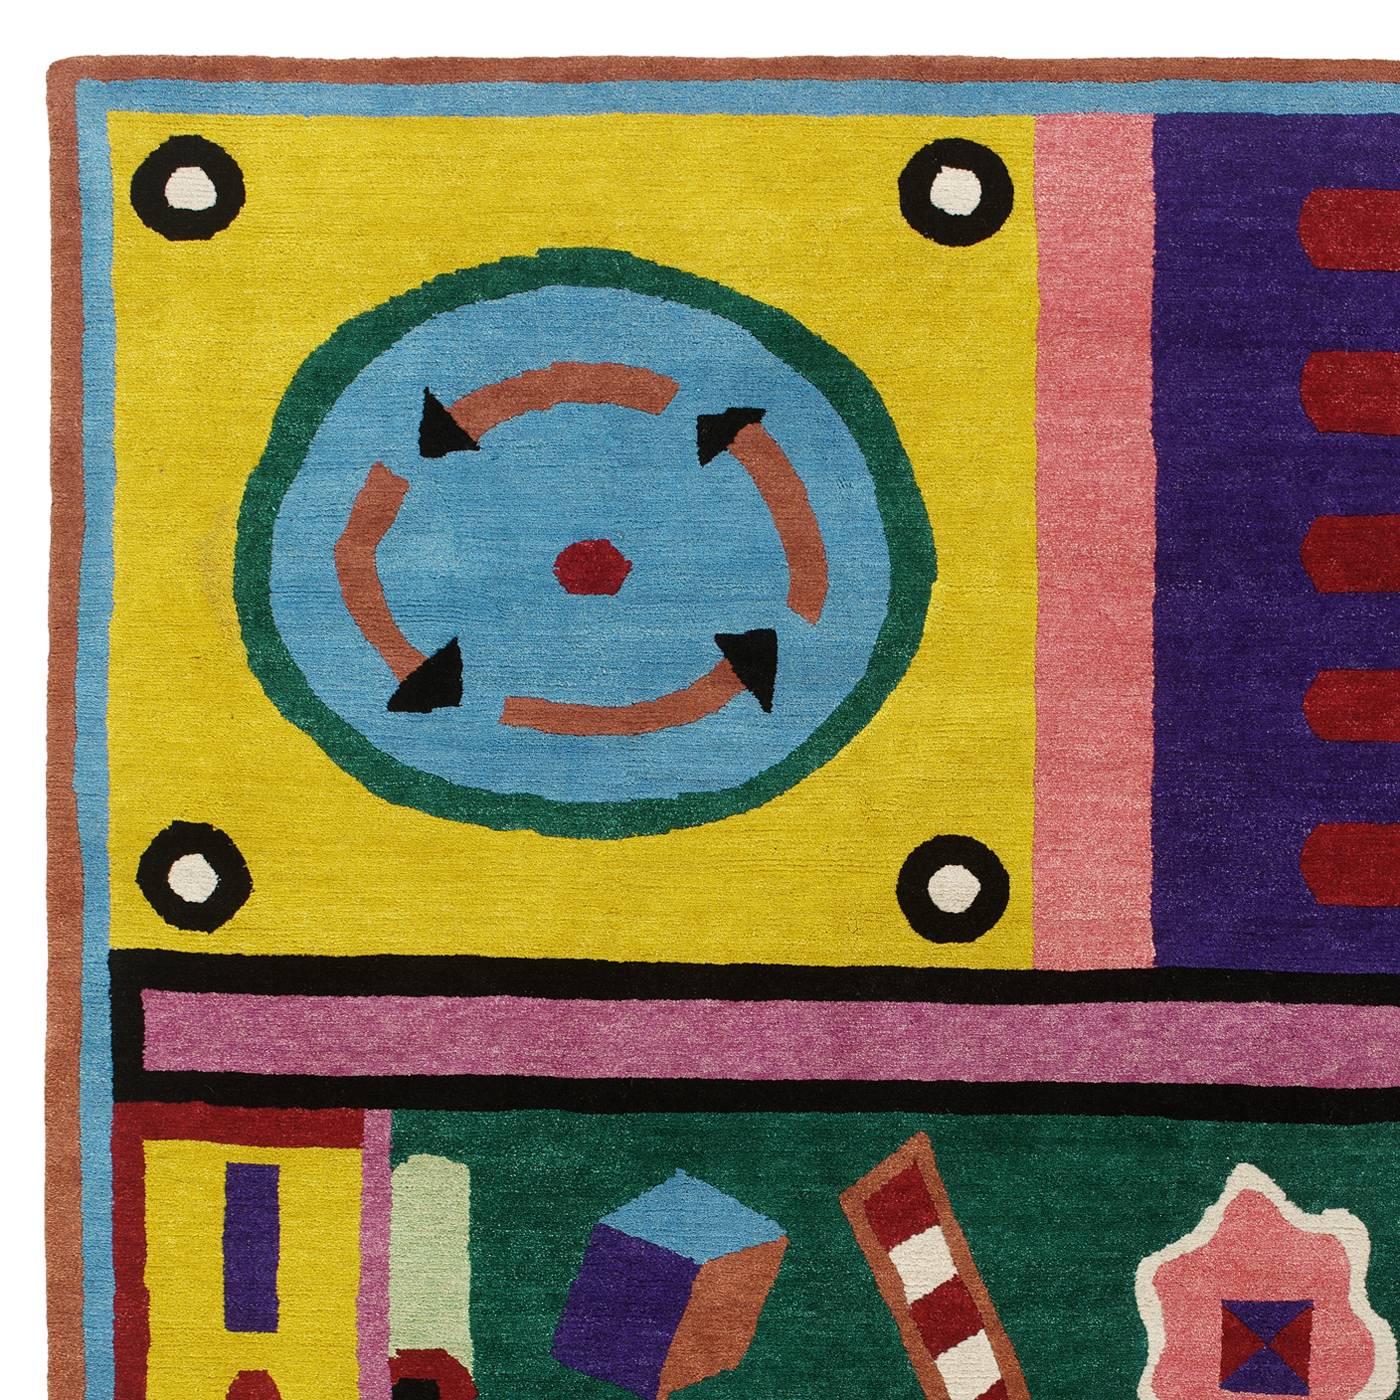 Designed by Nathalie Du Pasquier, who also signed each of the 36 pieces of this limited series, this carpet was entirely hand executed by expert artisans in Nepal: from the harvesting and spinning of the wool, to its dying, knotting and completion